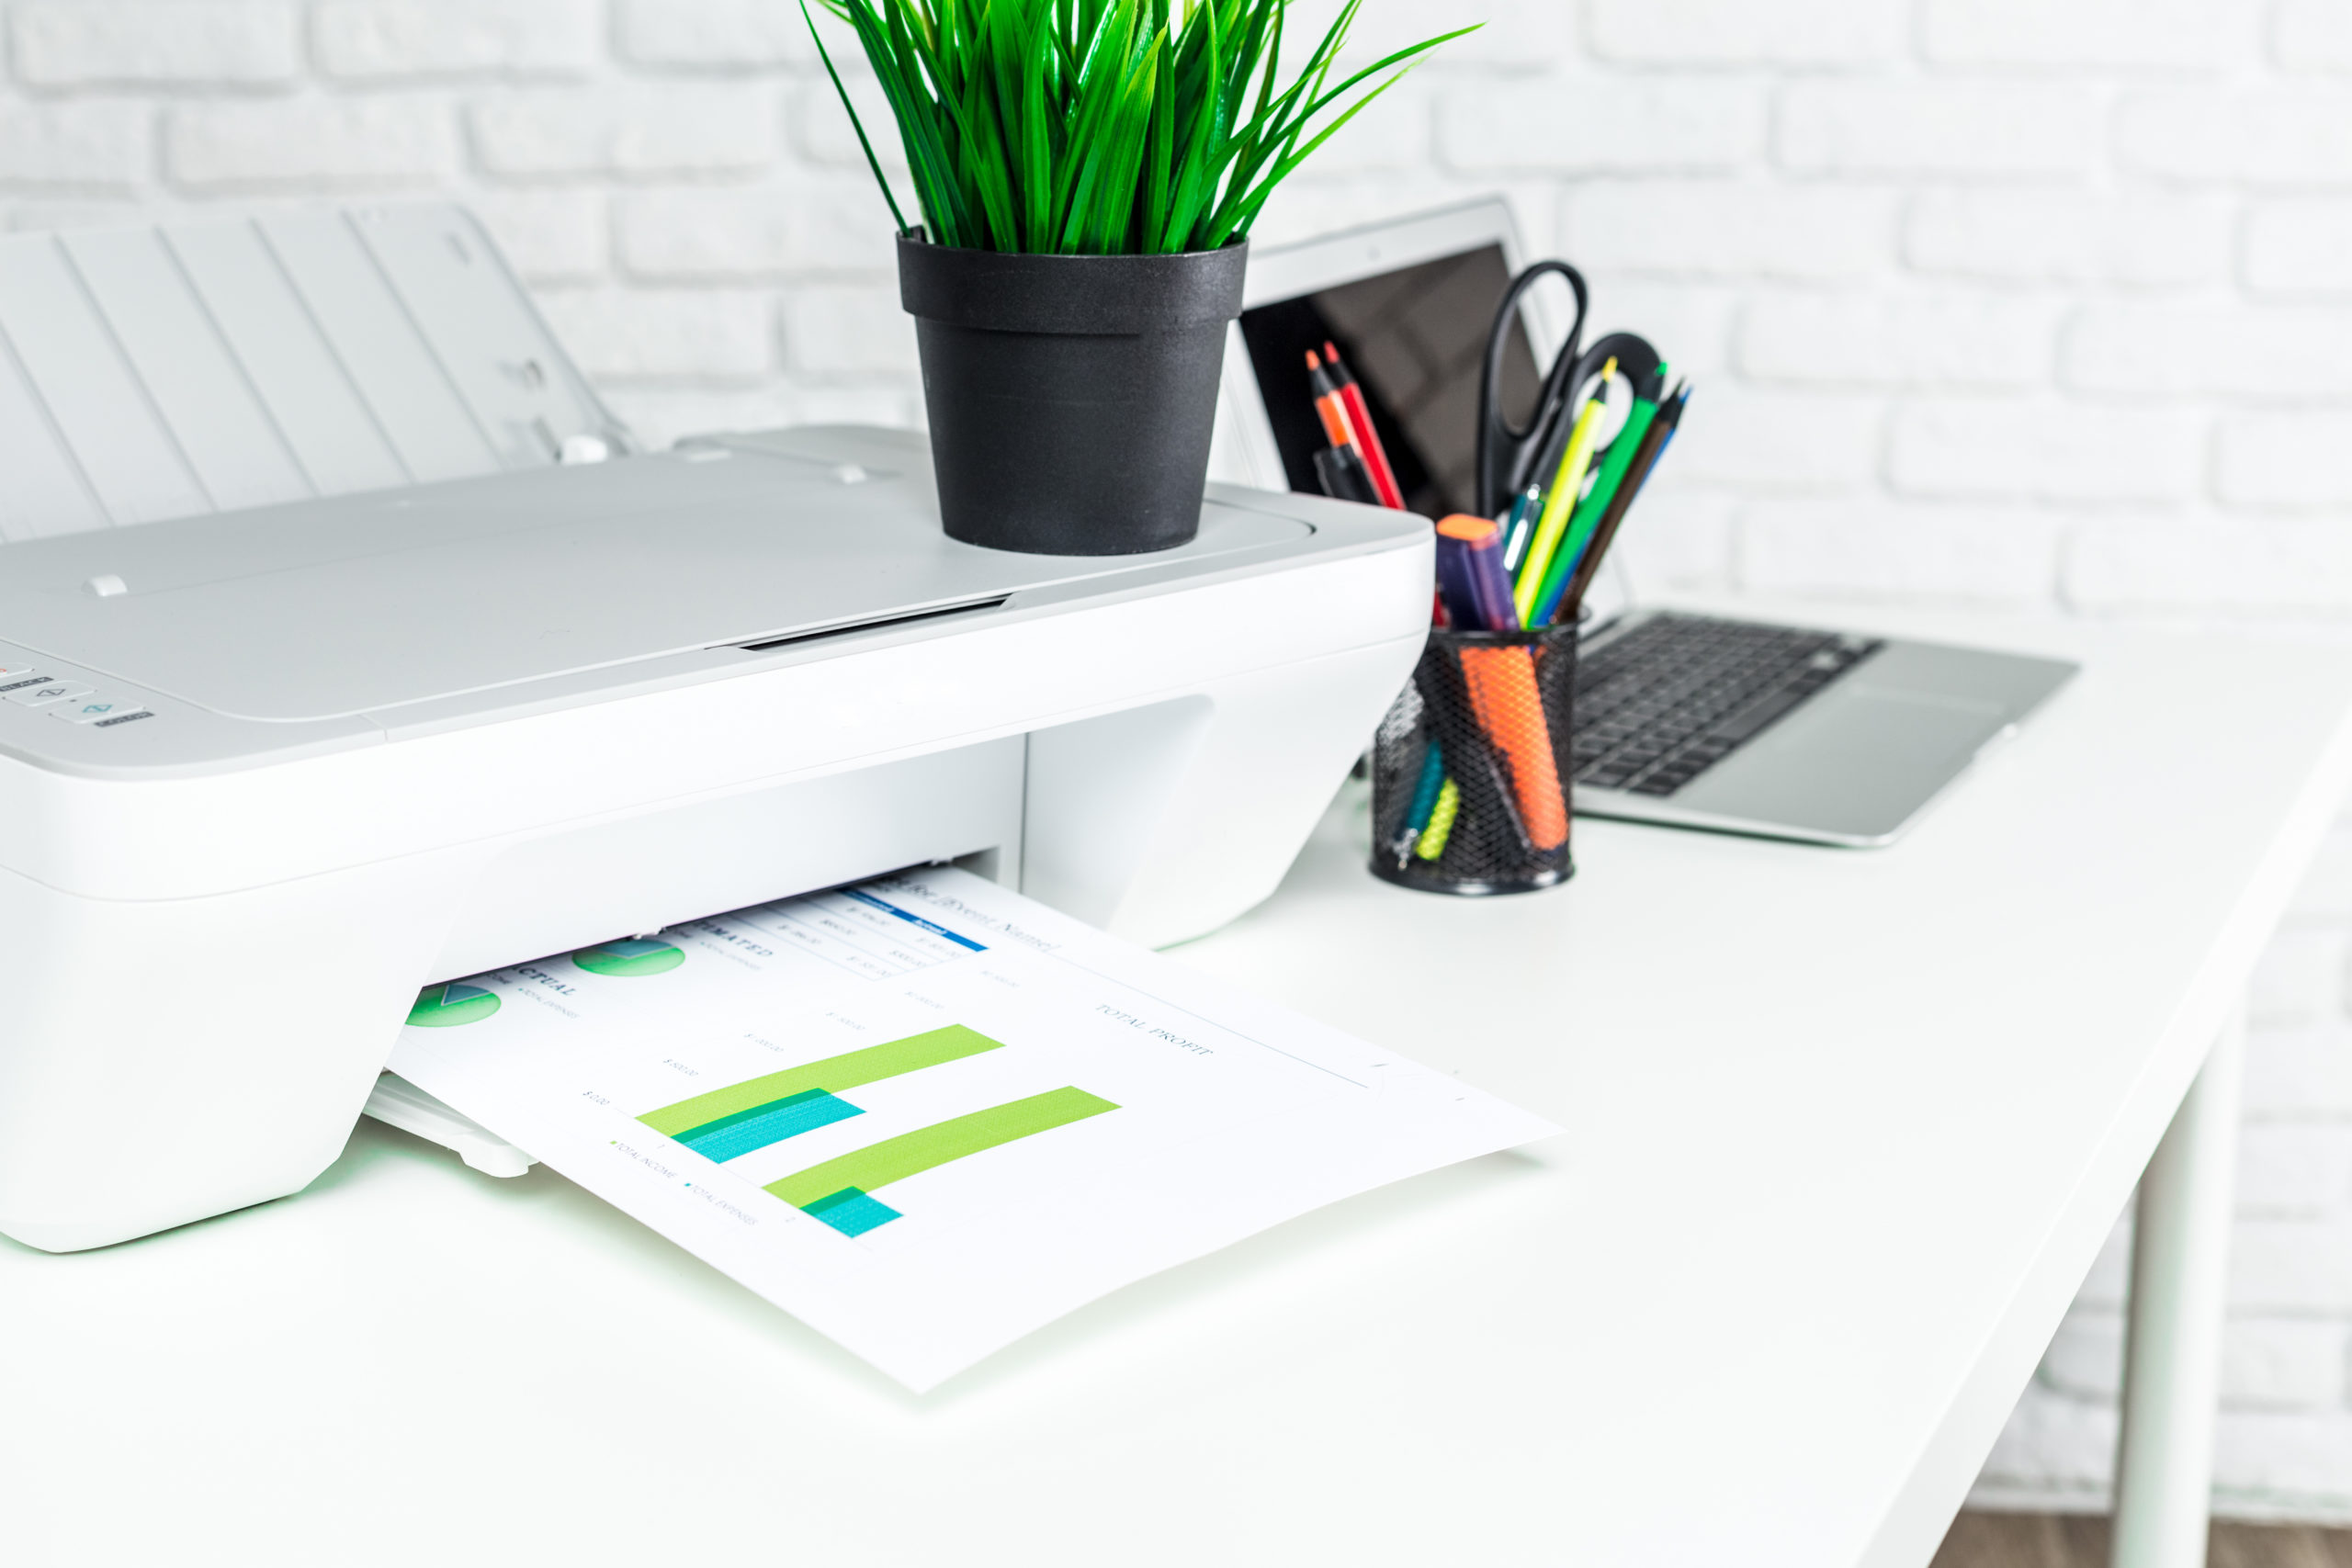 Home Printing Trends 2022: SMBs Outpacing Large Enterprises